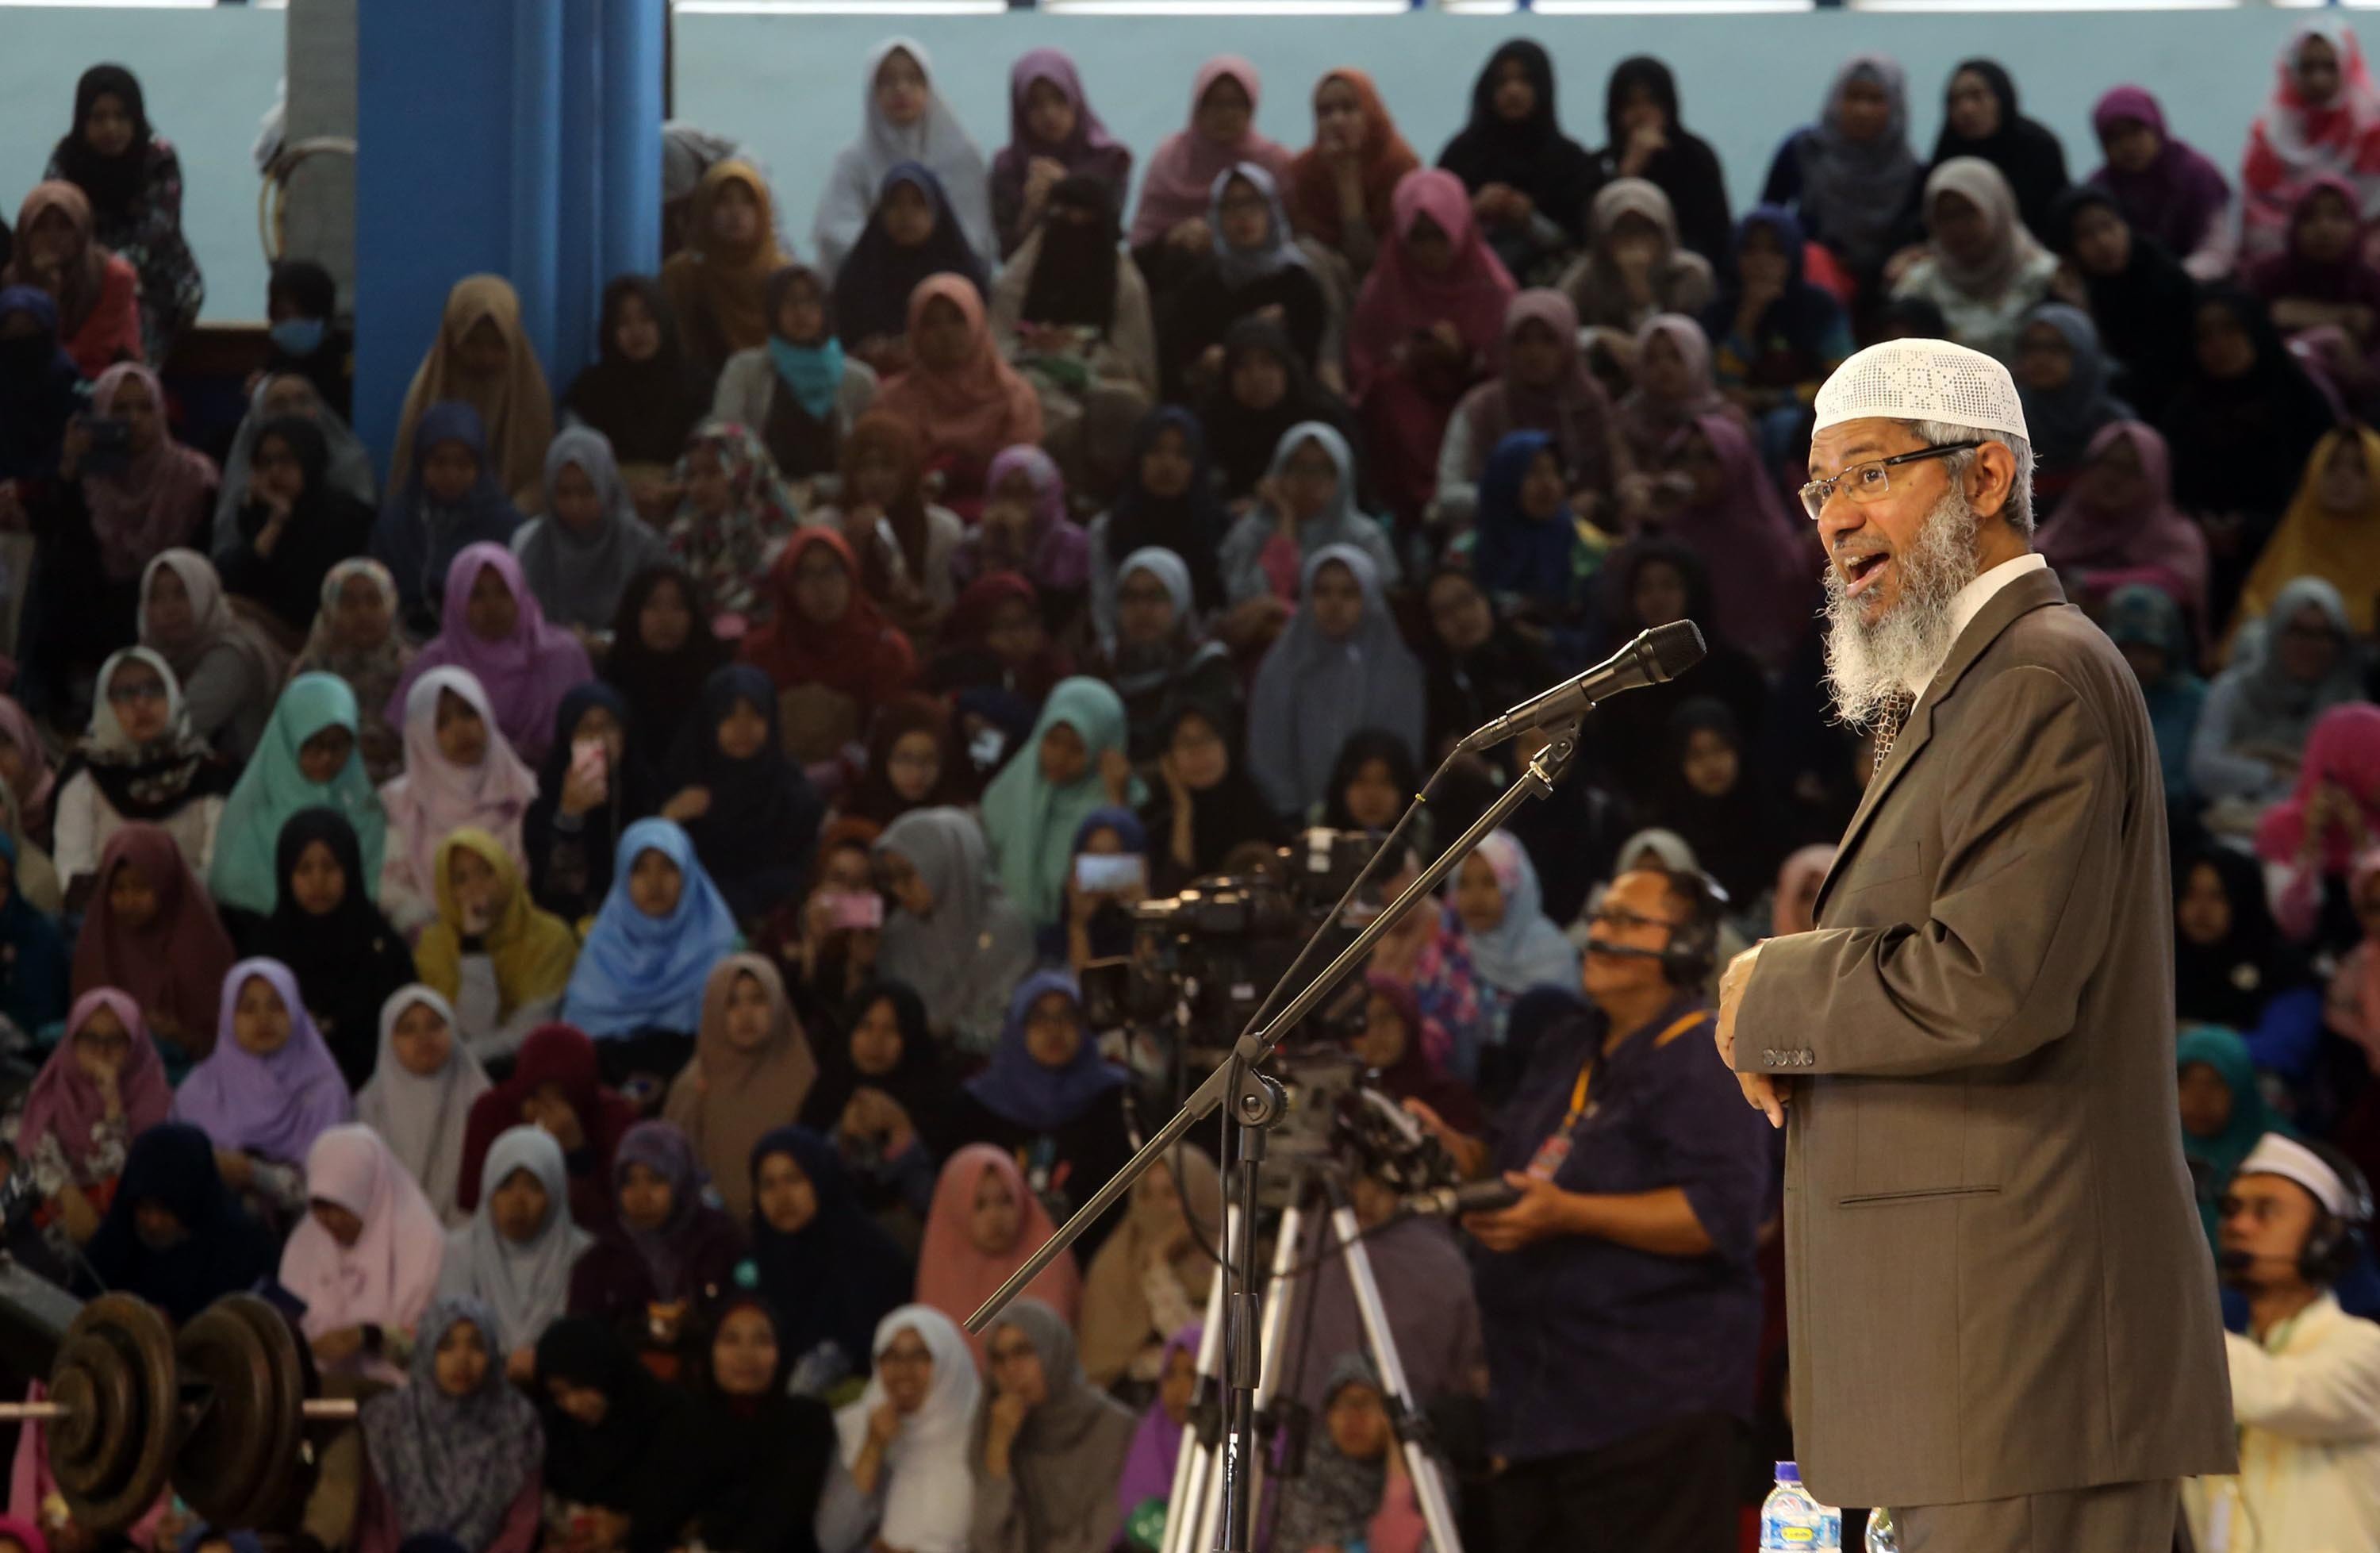 Controversial Islamic preacher Zakir Naik, who founded the Peace TV channel, is wanted by India on charges of money laundering and encouraging terrorism. Photo: Alamy